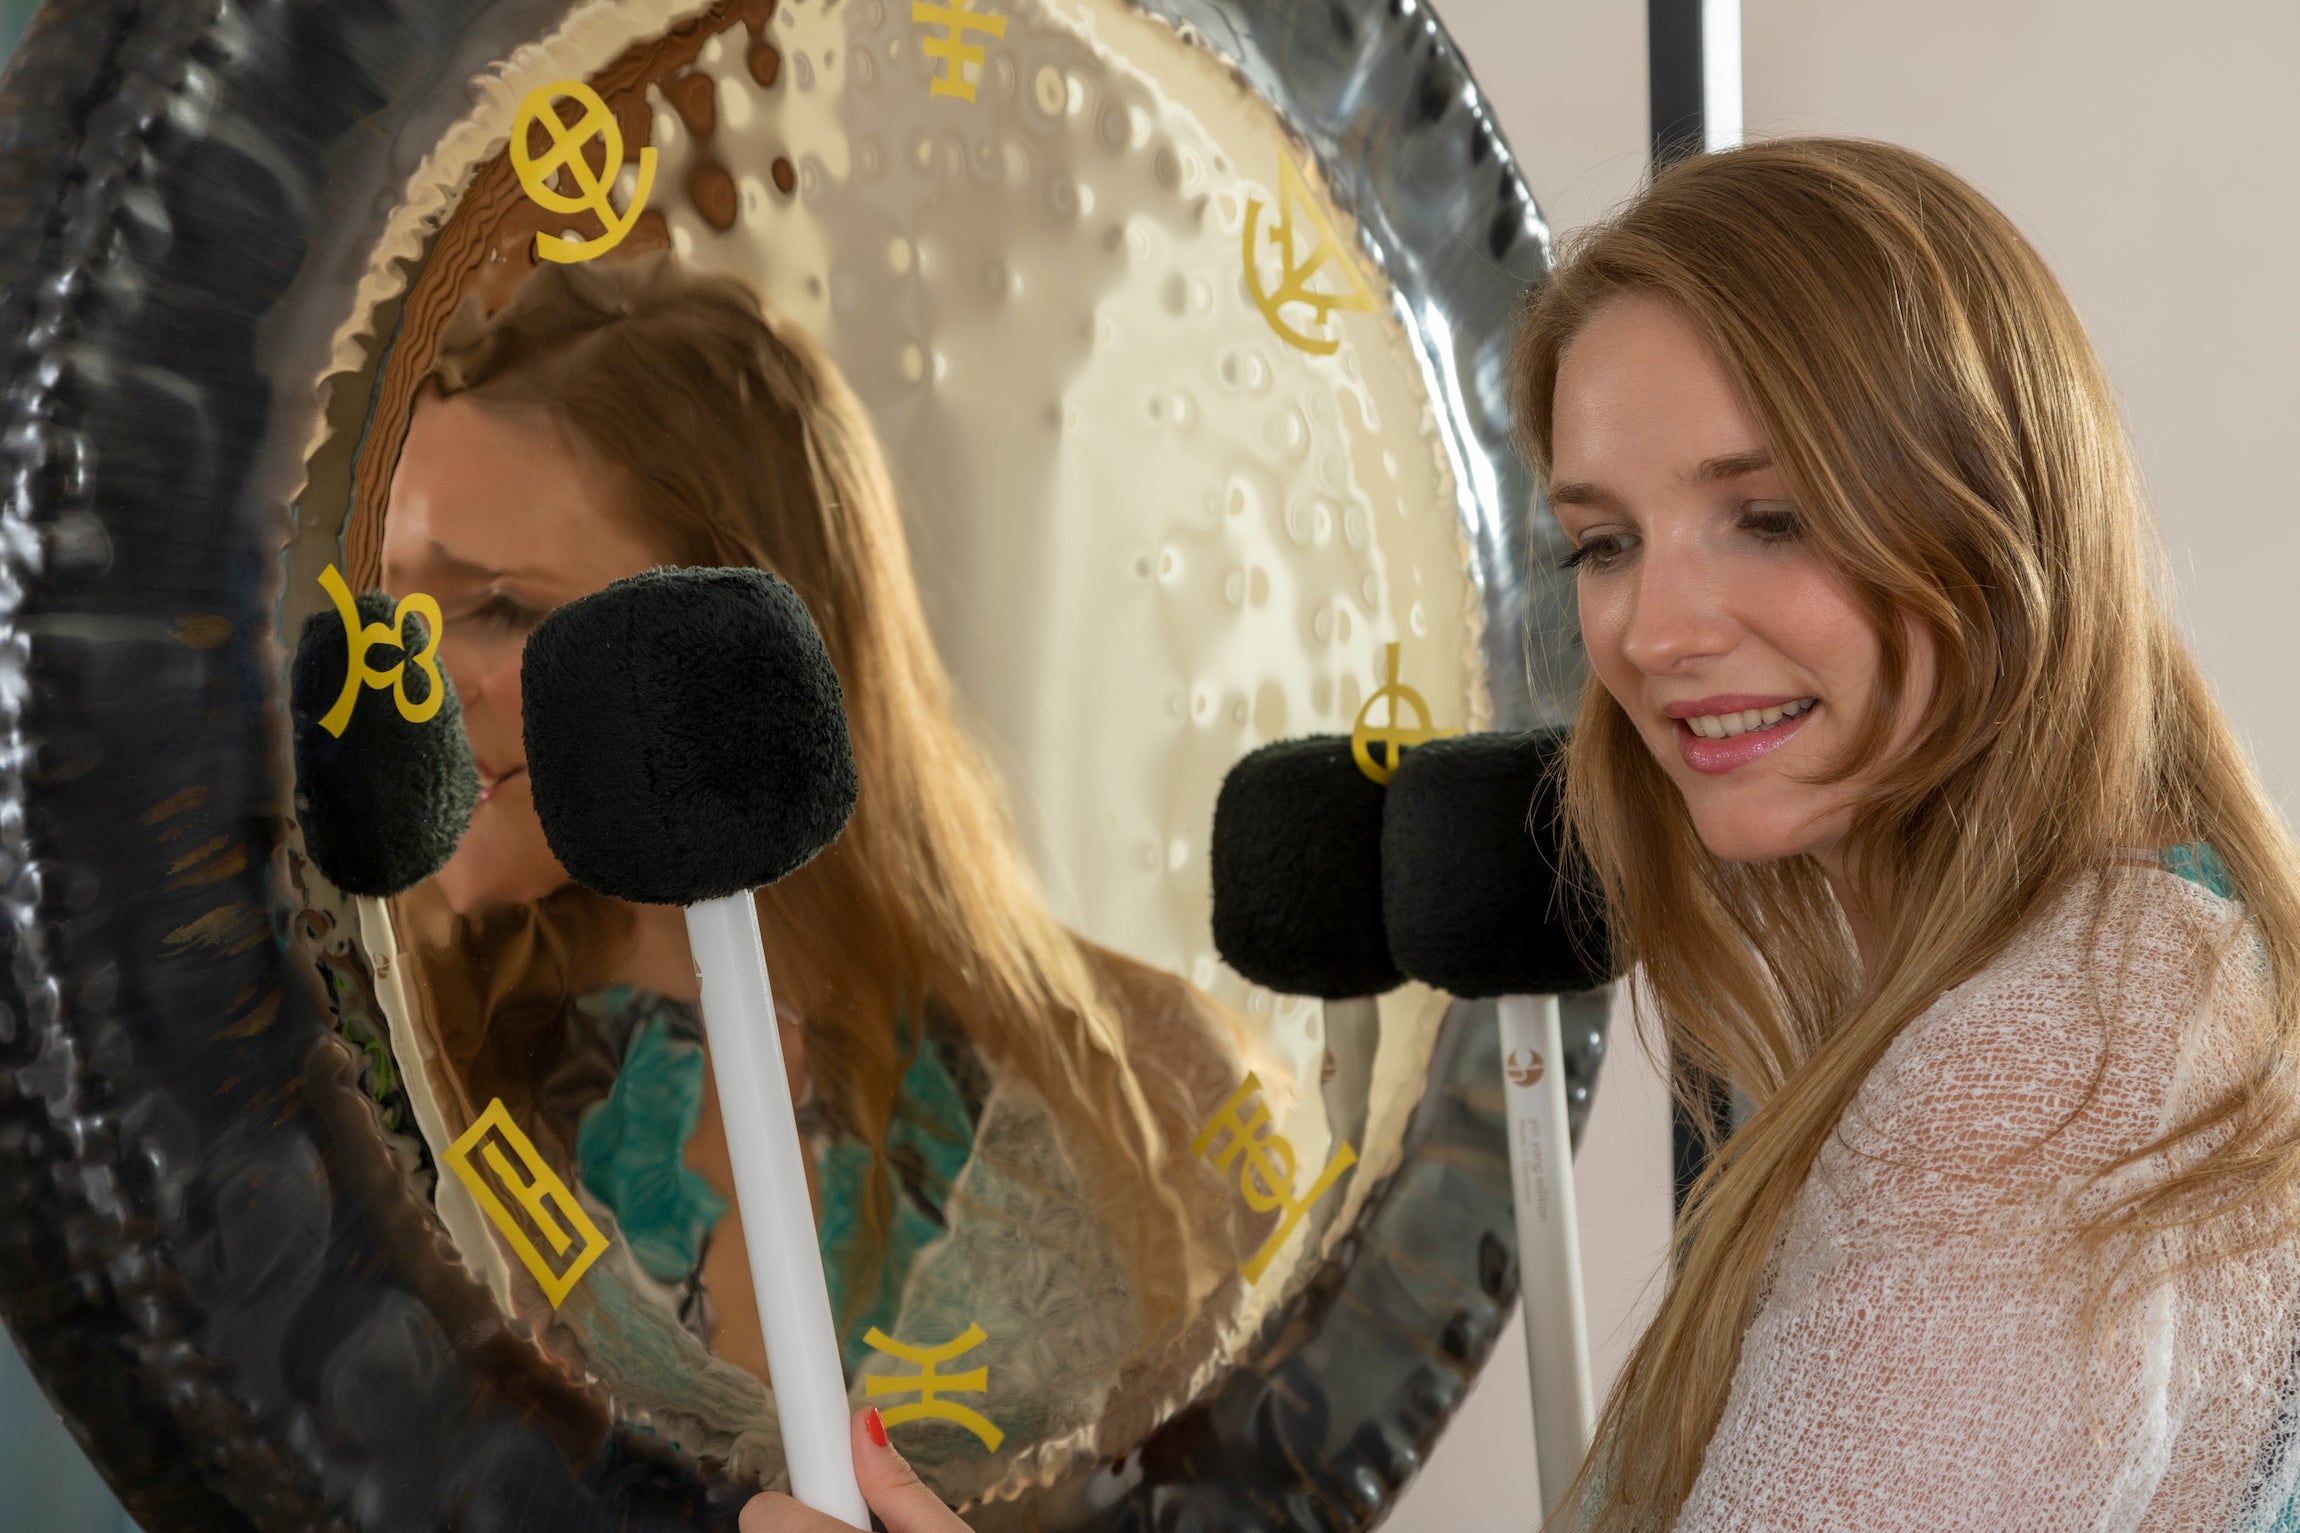 Frida Möhres - A passionate gong player